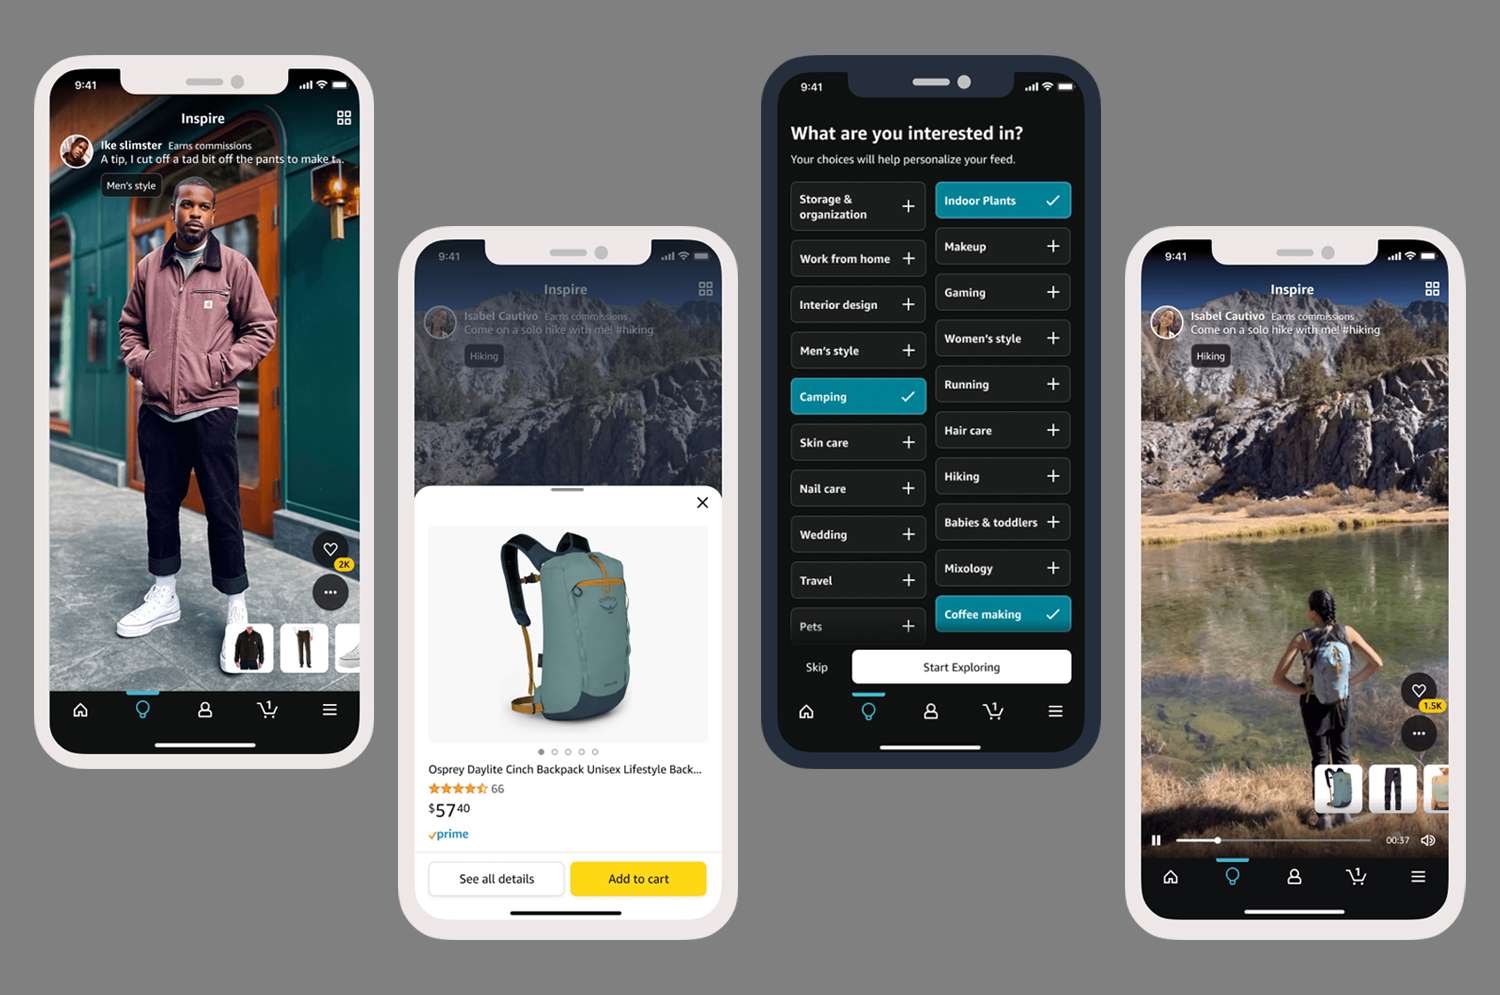 Amazon Launches Inspire, a TikTok-Like Feed Offering "Window Shopping" Experience